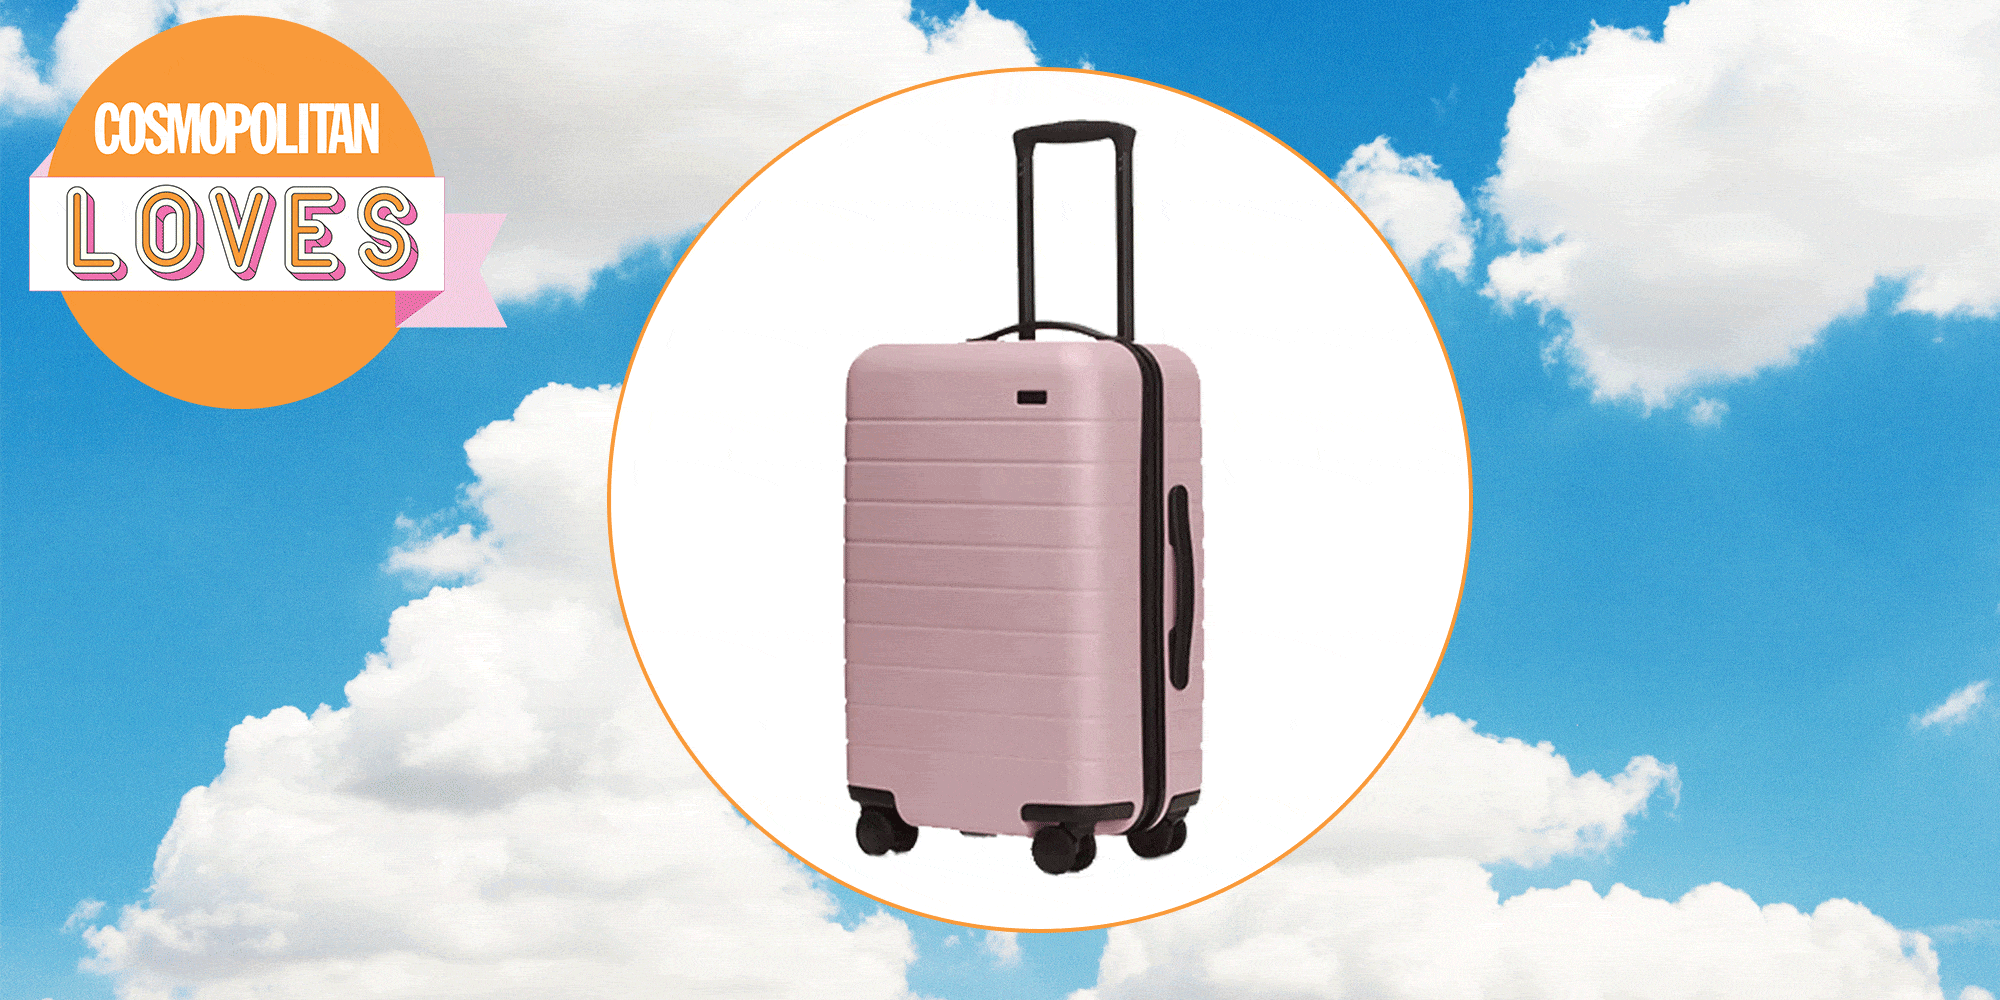 The Away Carry-On Suitcase Now Come in Technicolors